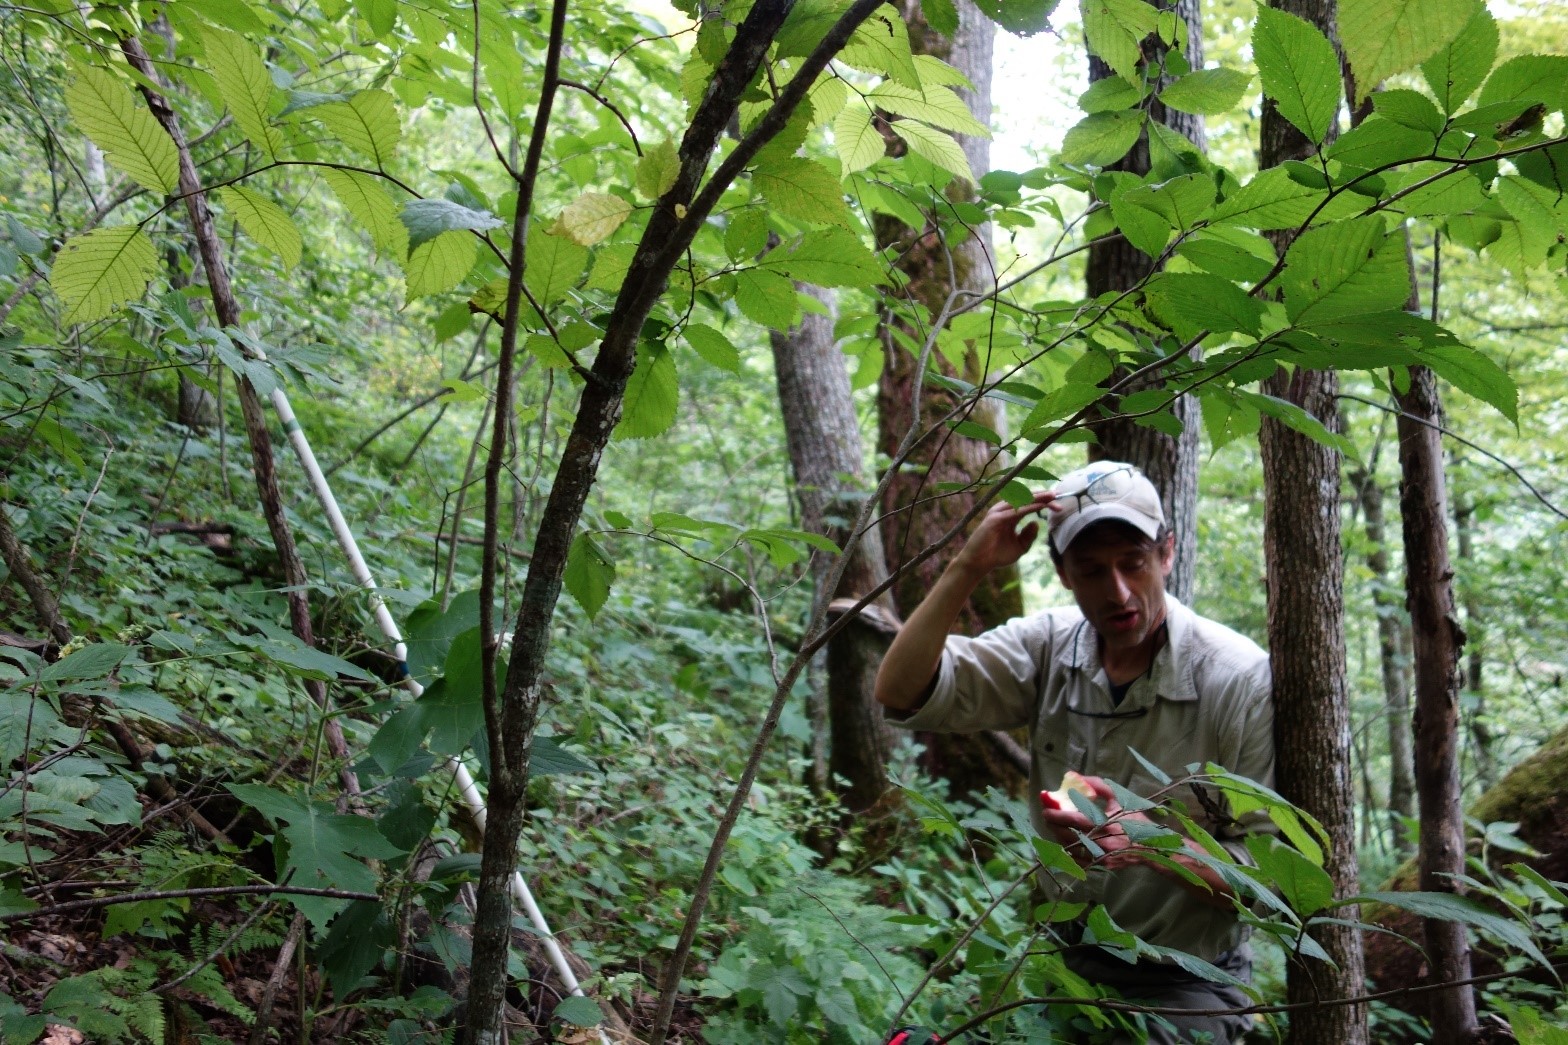 MNDNR Forester Alex Gehrig surveys regeneration on the study site in the summer of 2020